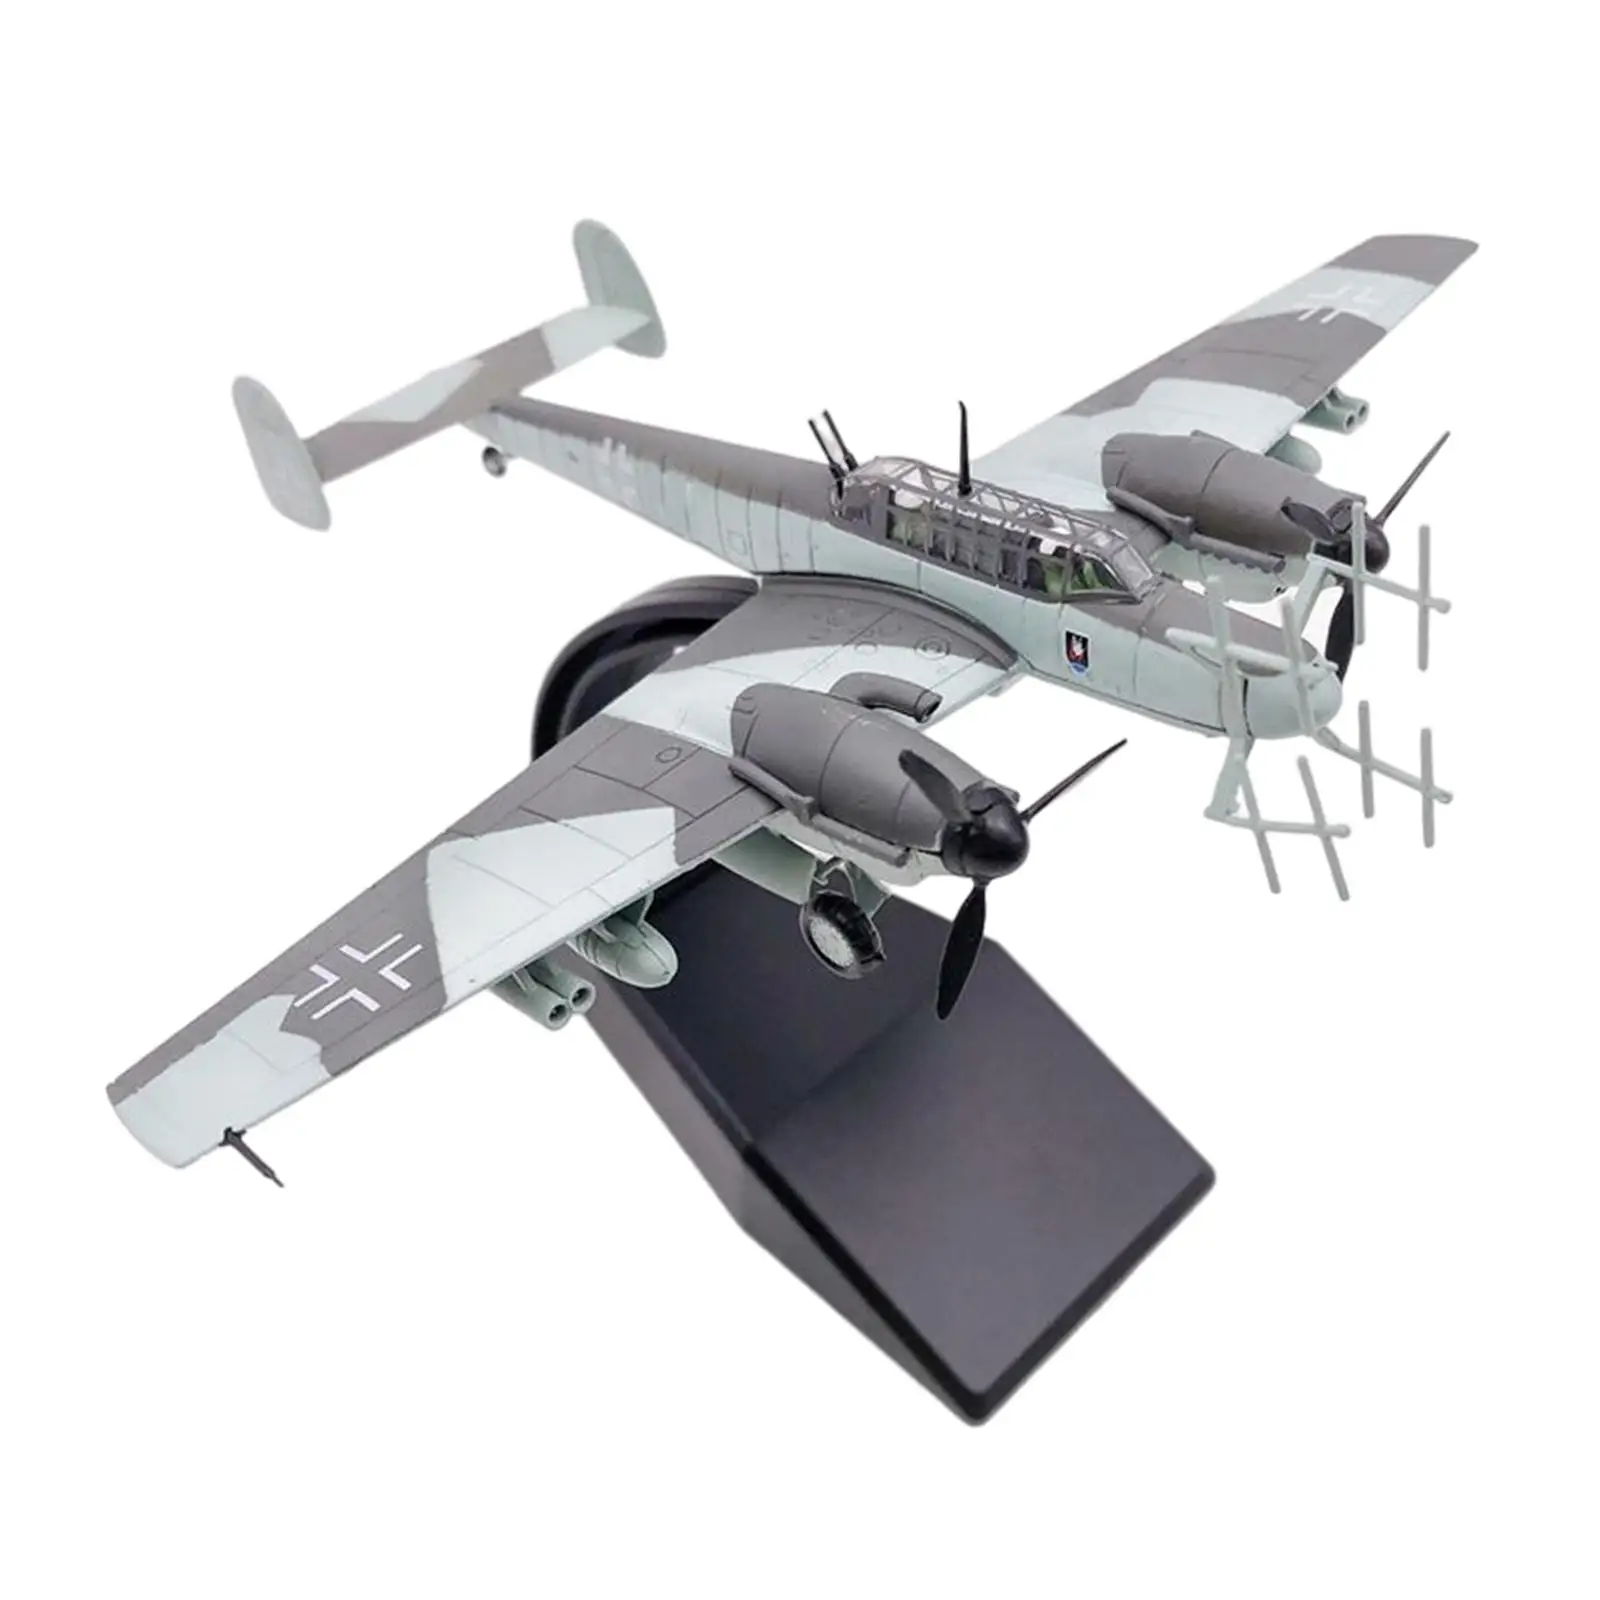 110 Aircraft Model Household Simulation Ornament Alloy Collections Gifts